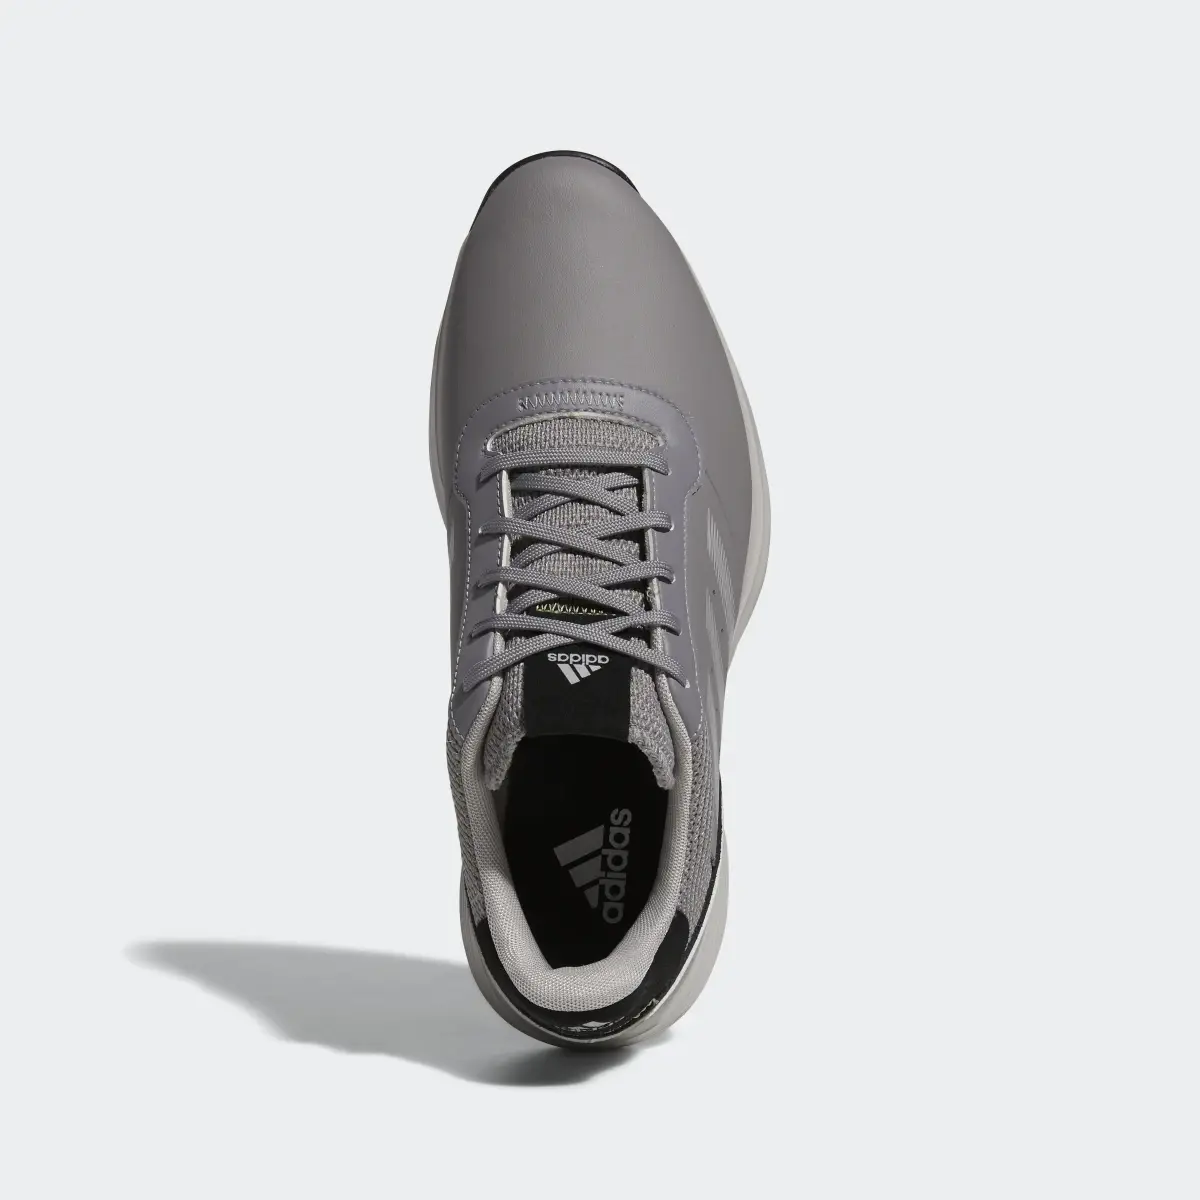 Adidas S2G Spikeless Leather Golf Shoes. 3